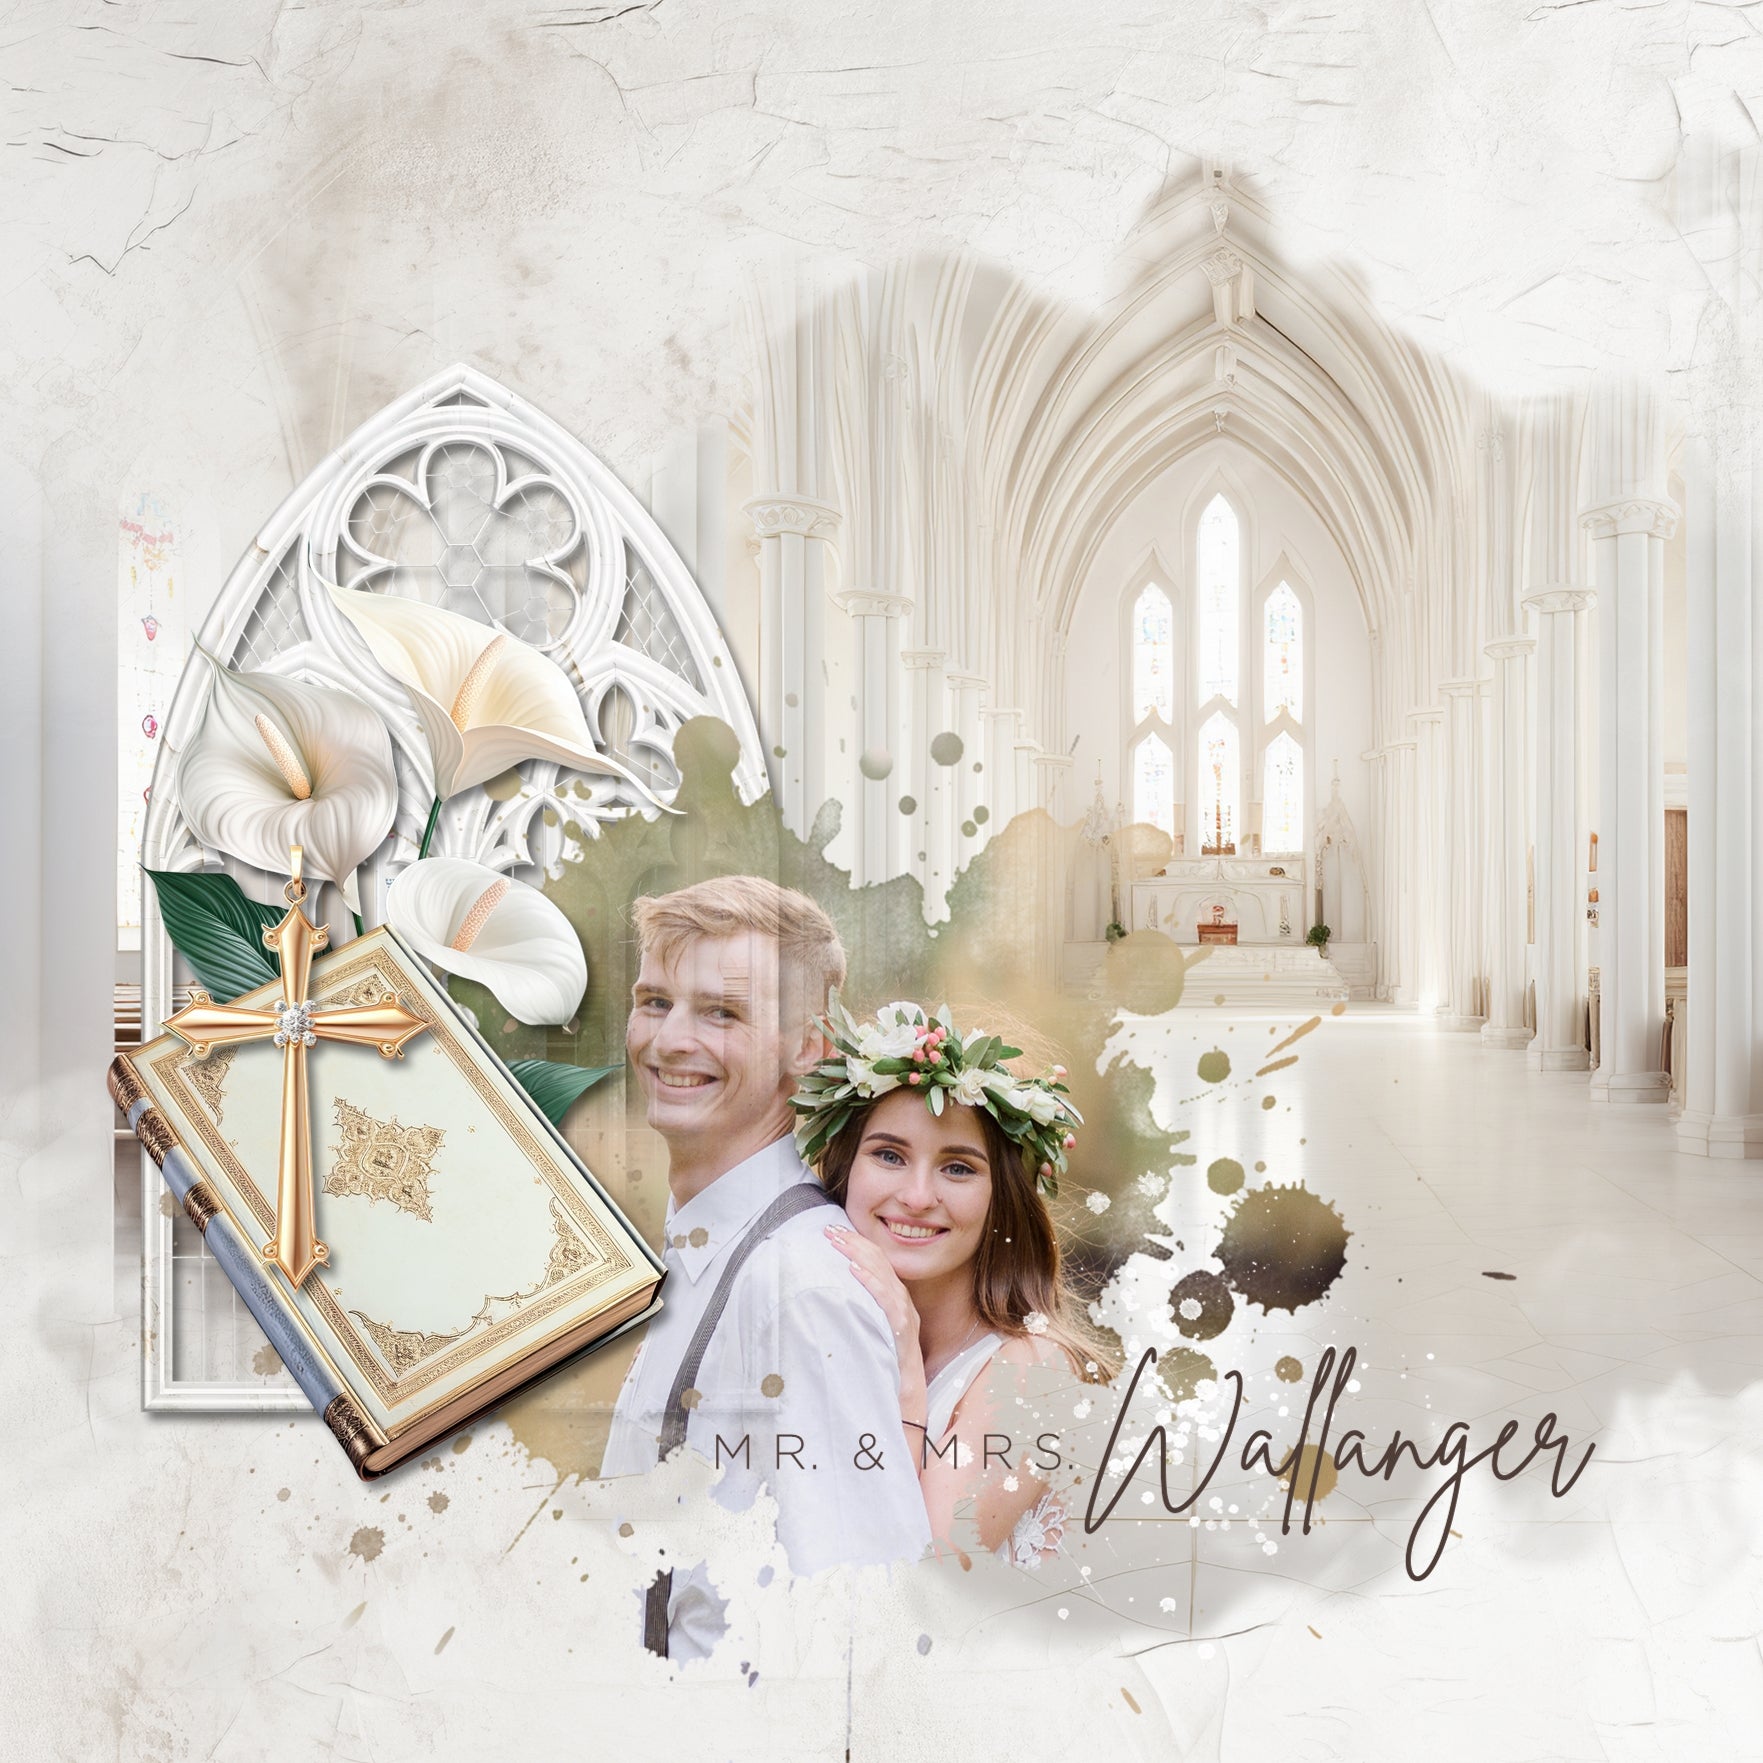 These beautiful and ornate digital scrapbooking stained glass window frames by Lucky Girl Creative digital art are the perfect addition to any page featuring church, faith, religion, wedding, and other historic sites such as basilicas, cathedrals, temples, and chapels. 